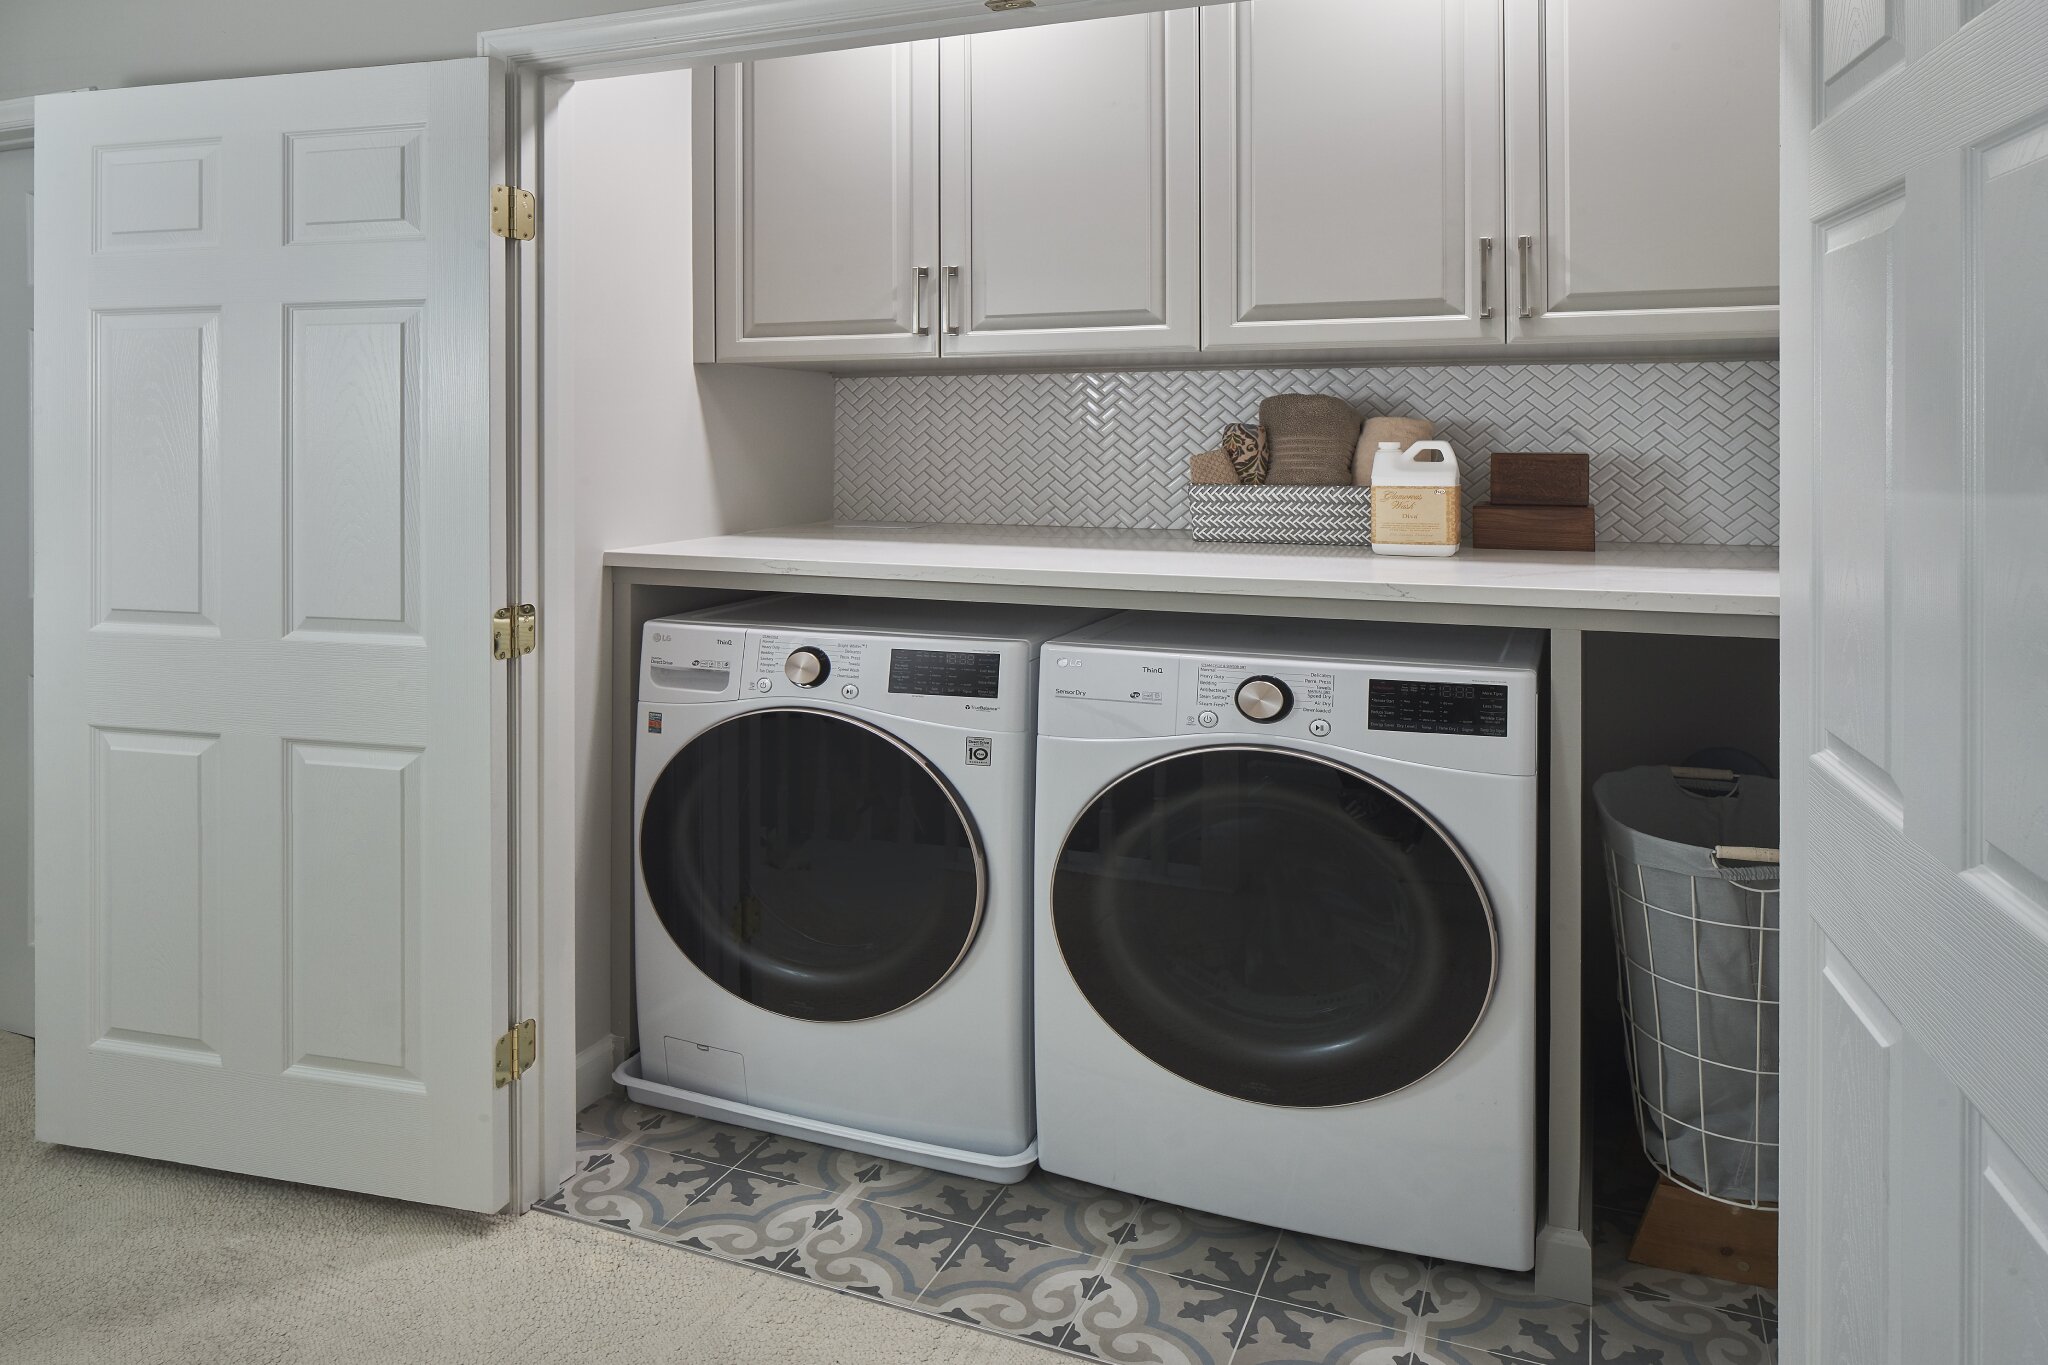 Renovated laundry room tucked behind two large french doors, with countertop and overhead cabinetry